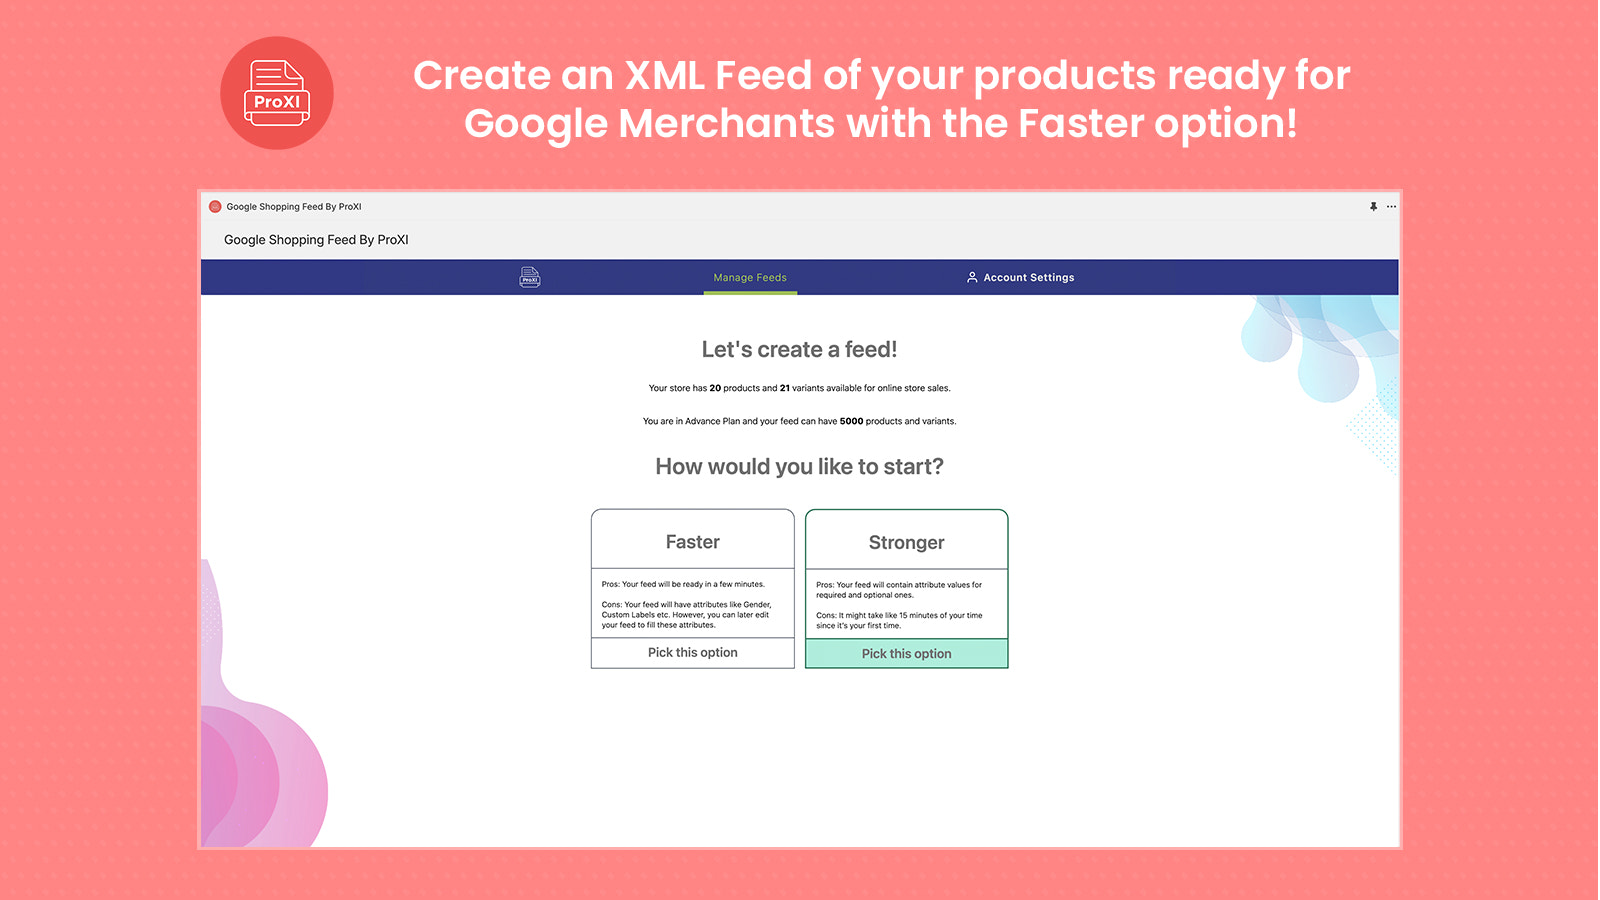 Manage Feeds Page: Organize and customize XML feeds effortlessly